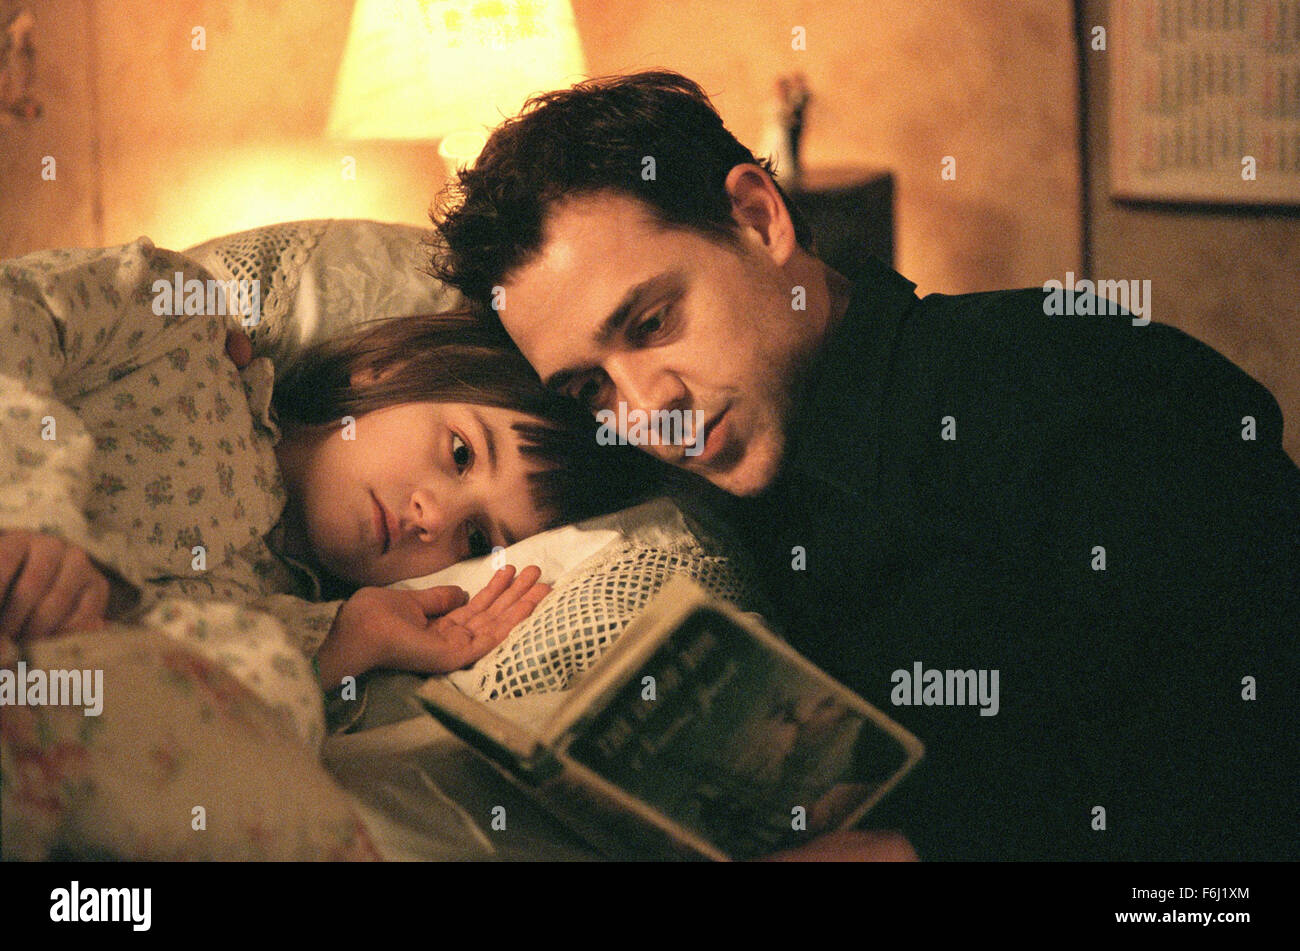 Nov 08, 2002; Glasgow, Scotland, UK; LISA MCKINLAY and JAMIE SIVES star as Mary and Wilbur in the comedy drama 'Wilbur Wants to Kill Himself' directed by Lone Scherfig. Stock Photo